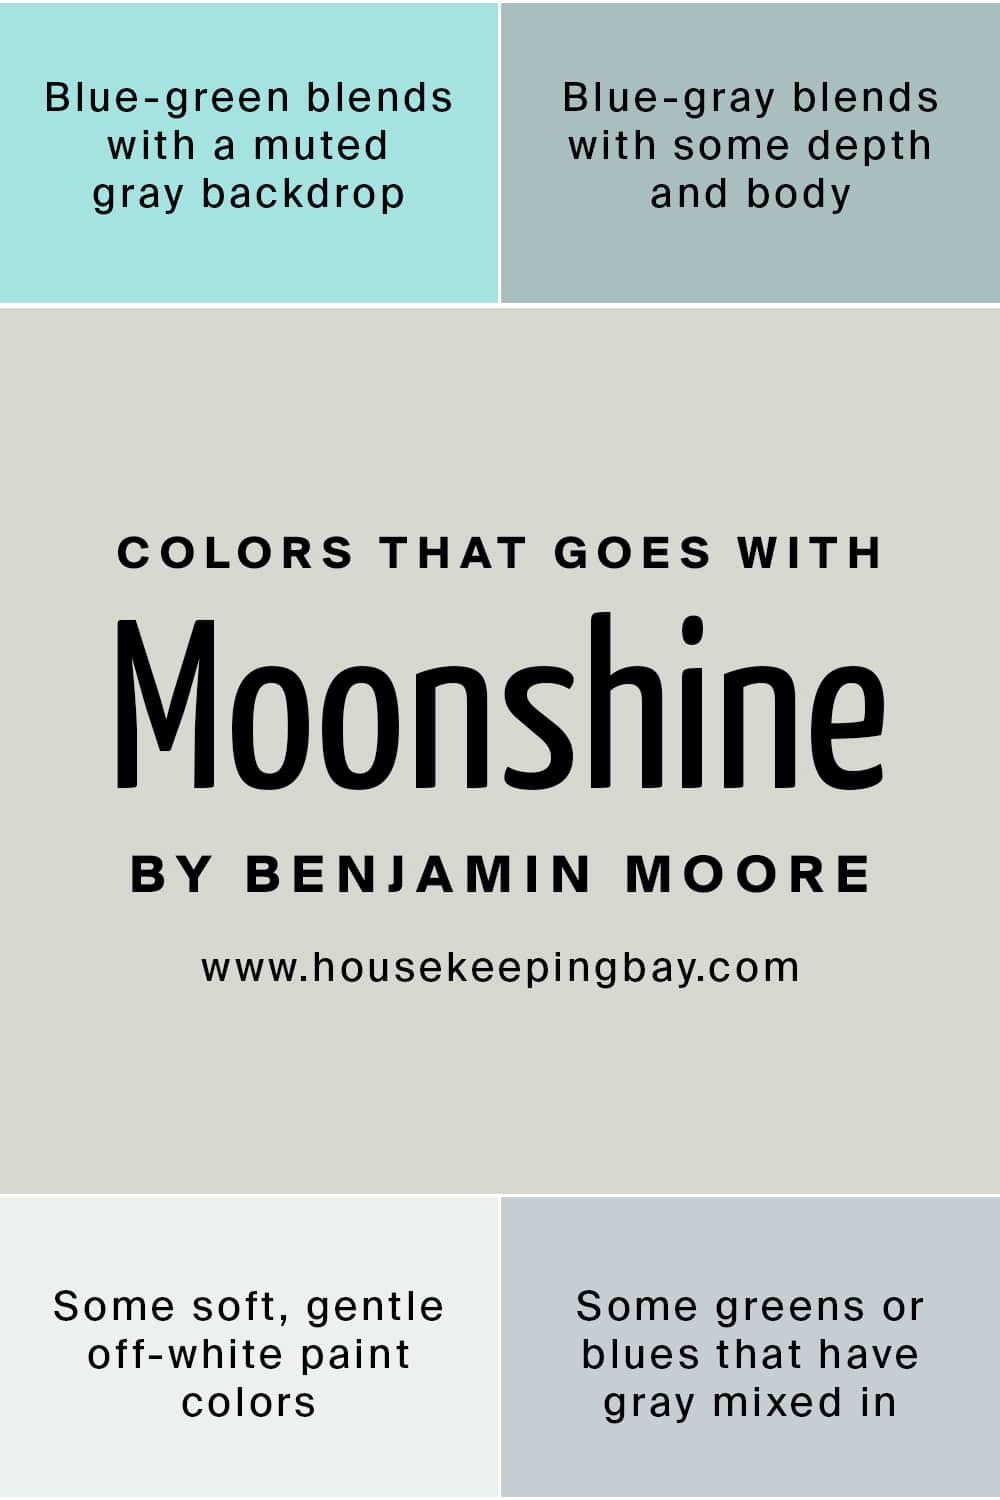 Colors that goes with Moonshine by Benjamin Moore